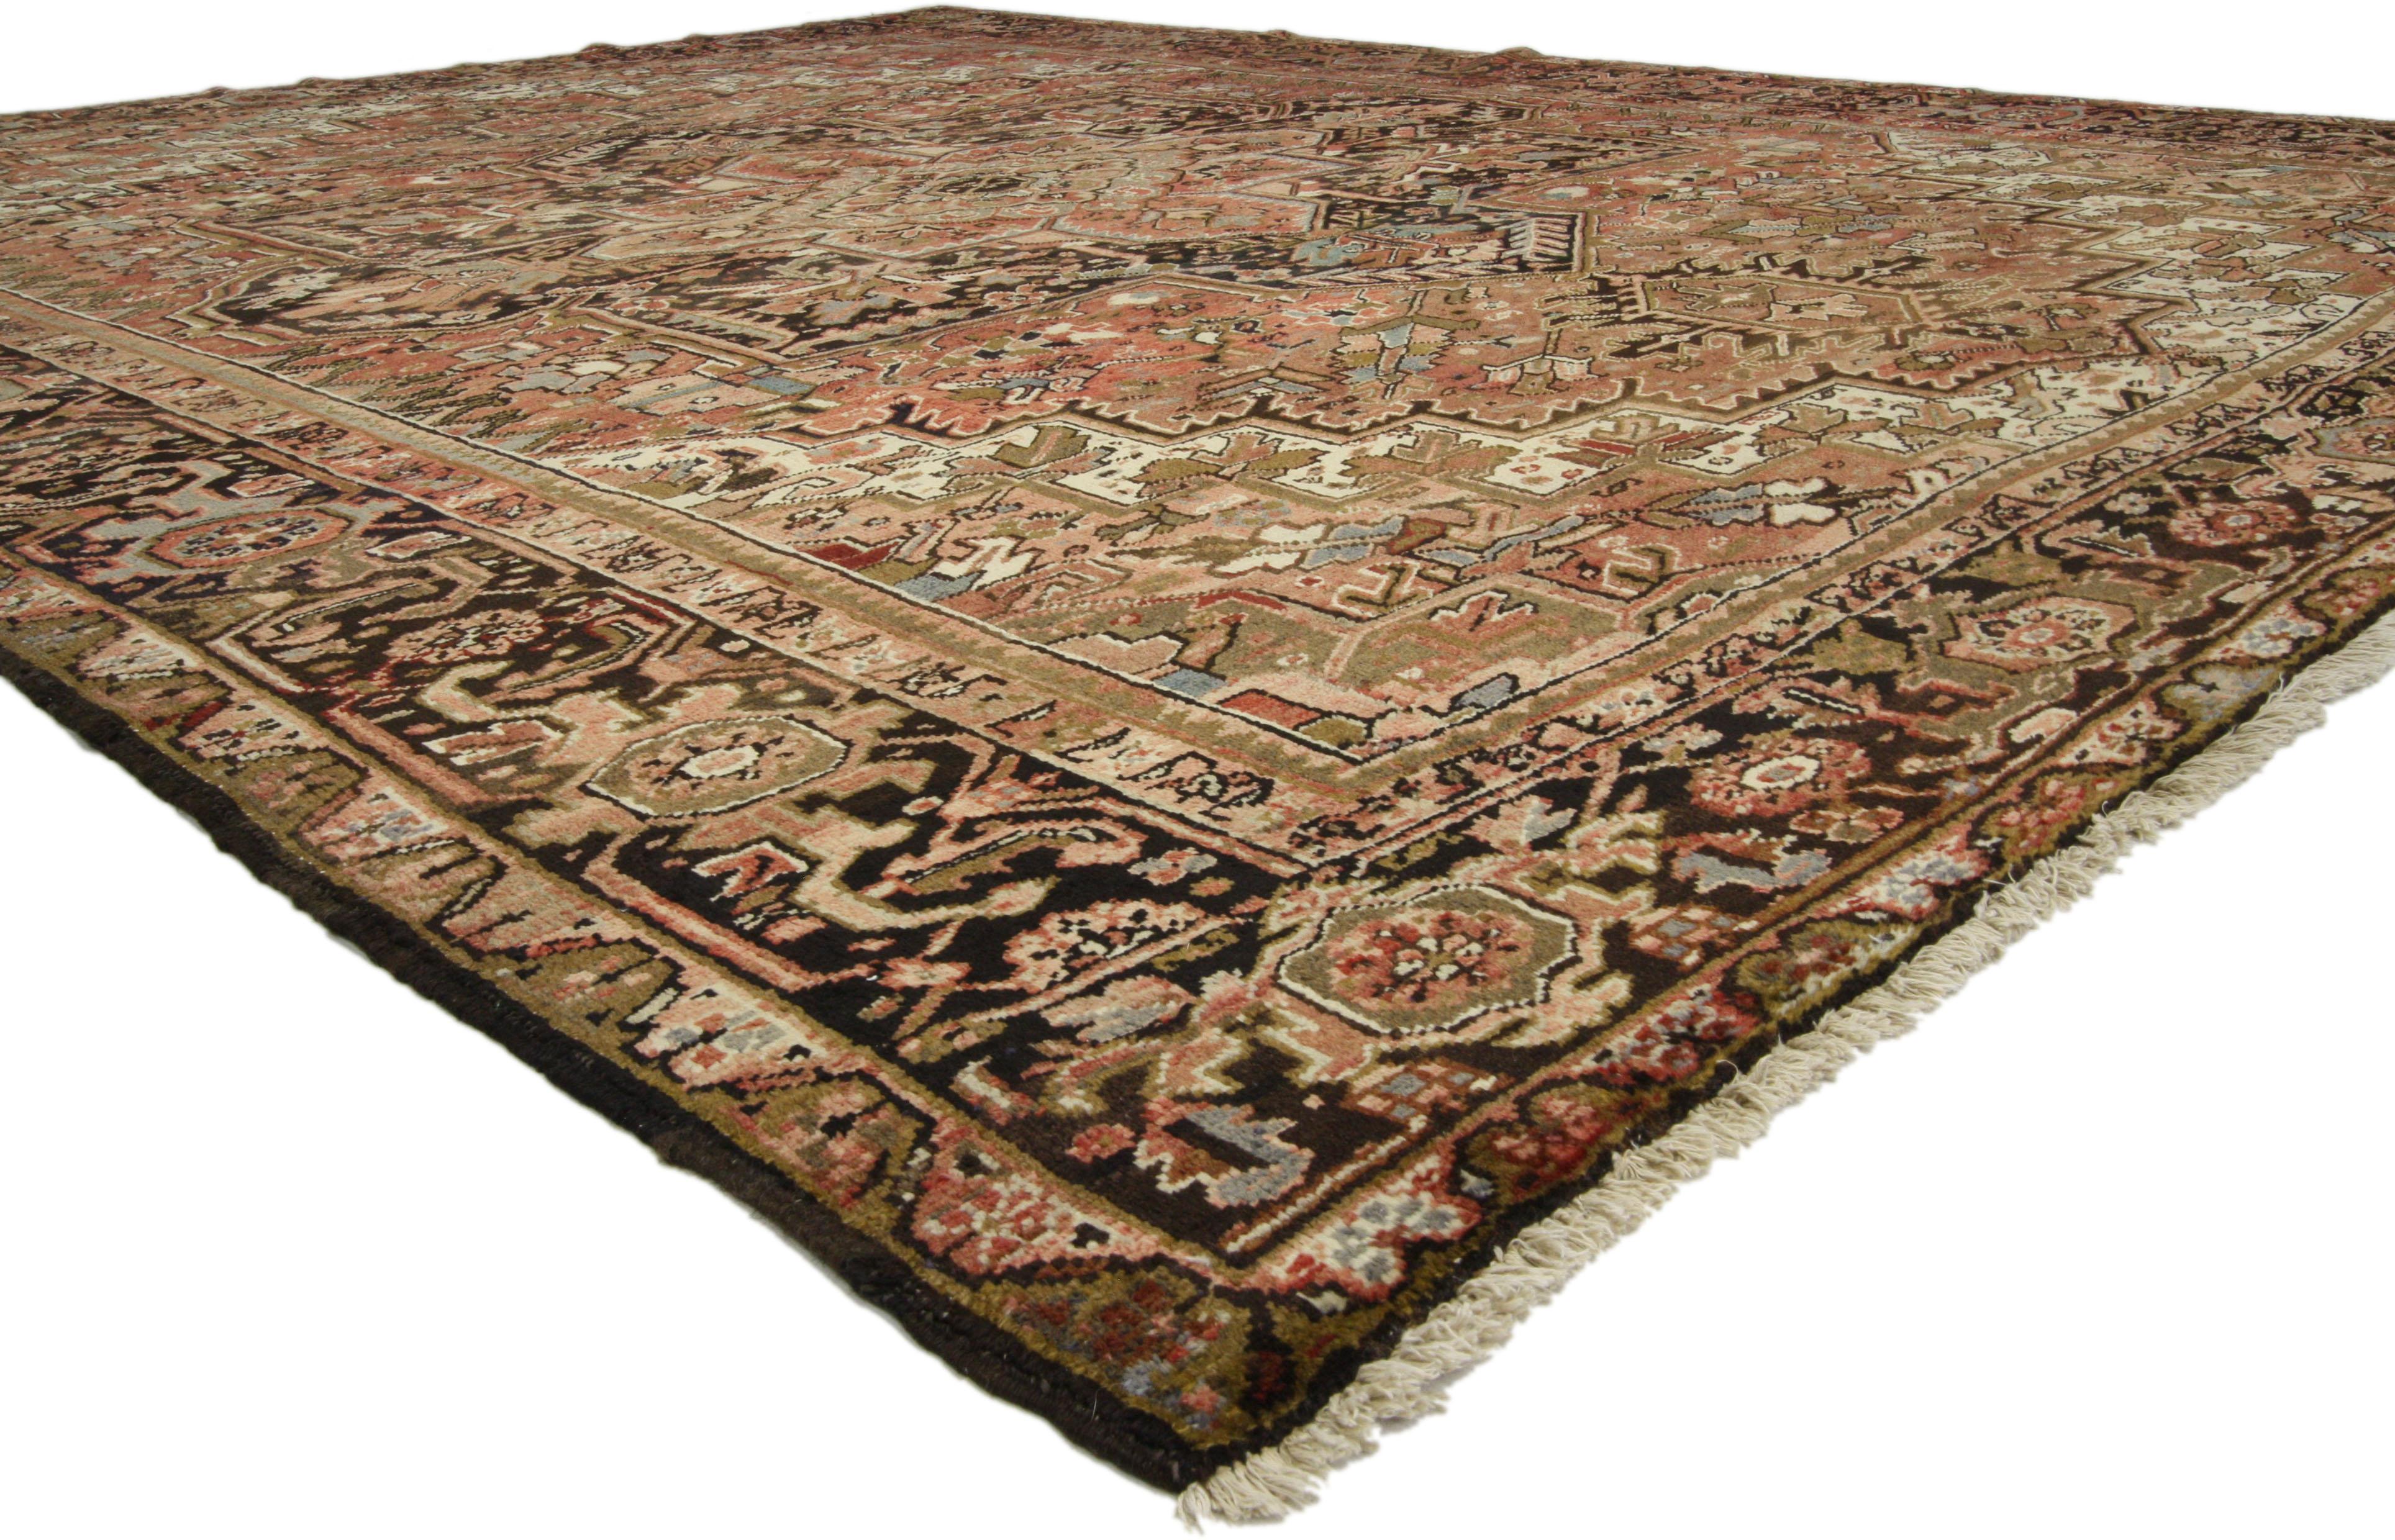 73720, vintage Heriz rug with Luxe style and warm, rustic colors. With timeless appeal, refined colors, and architectural design elements, this hand knotted wool vintage Persian Heriz rug can beautifully blend contemporary and traditional interiors.